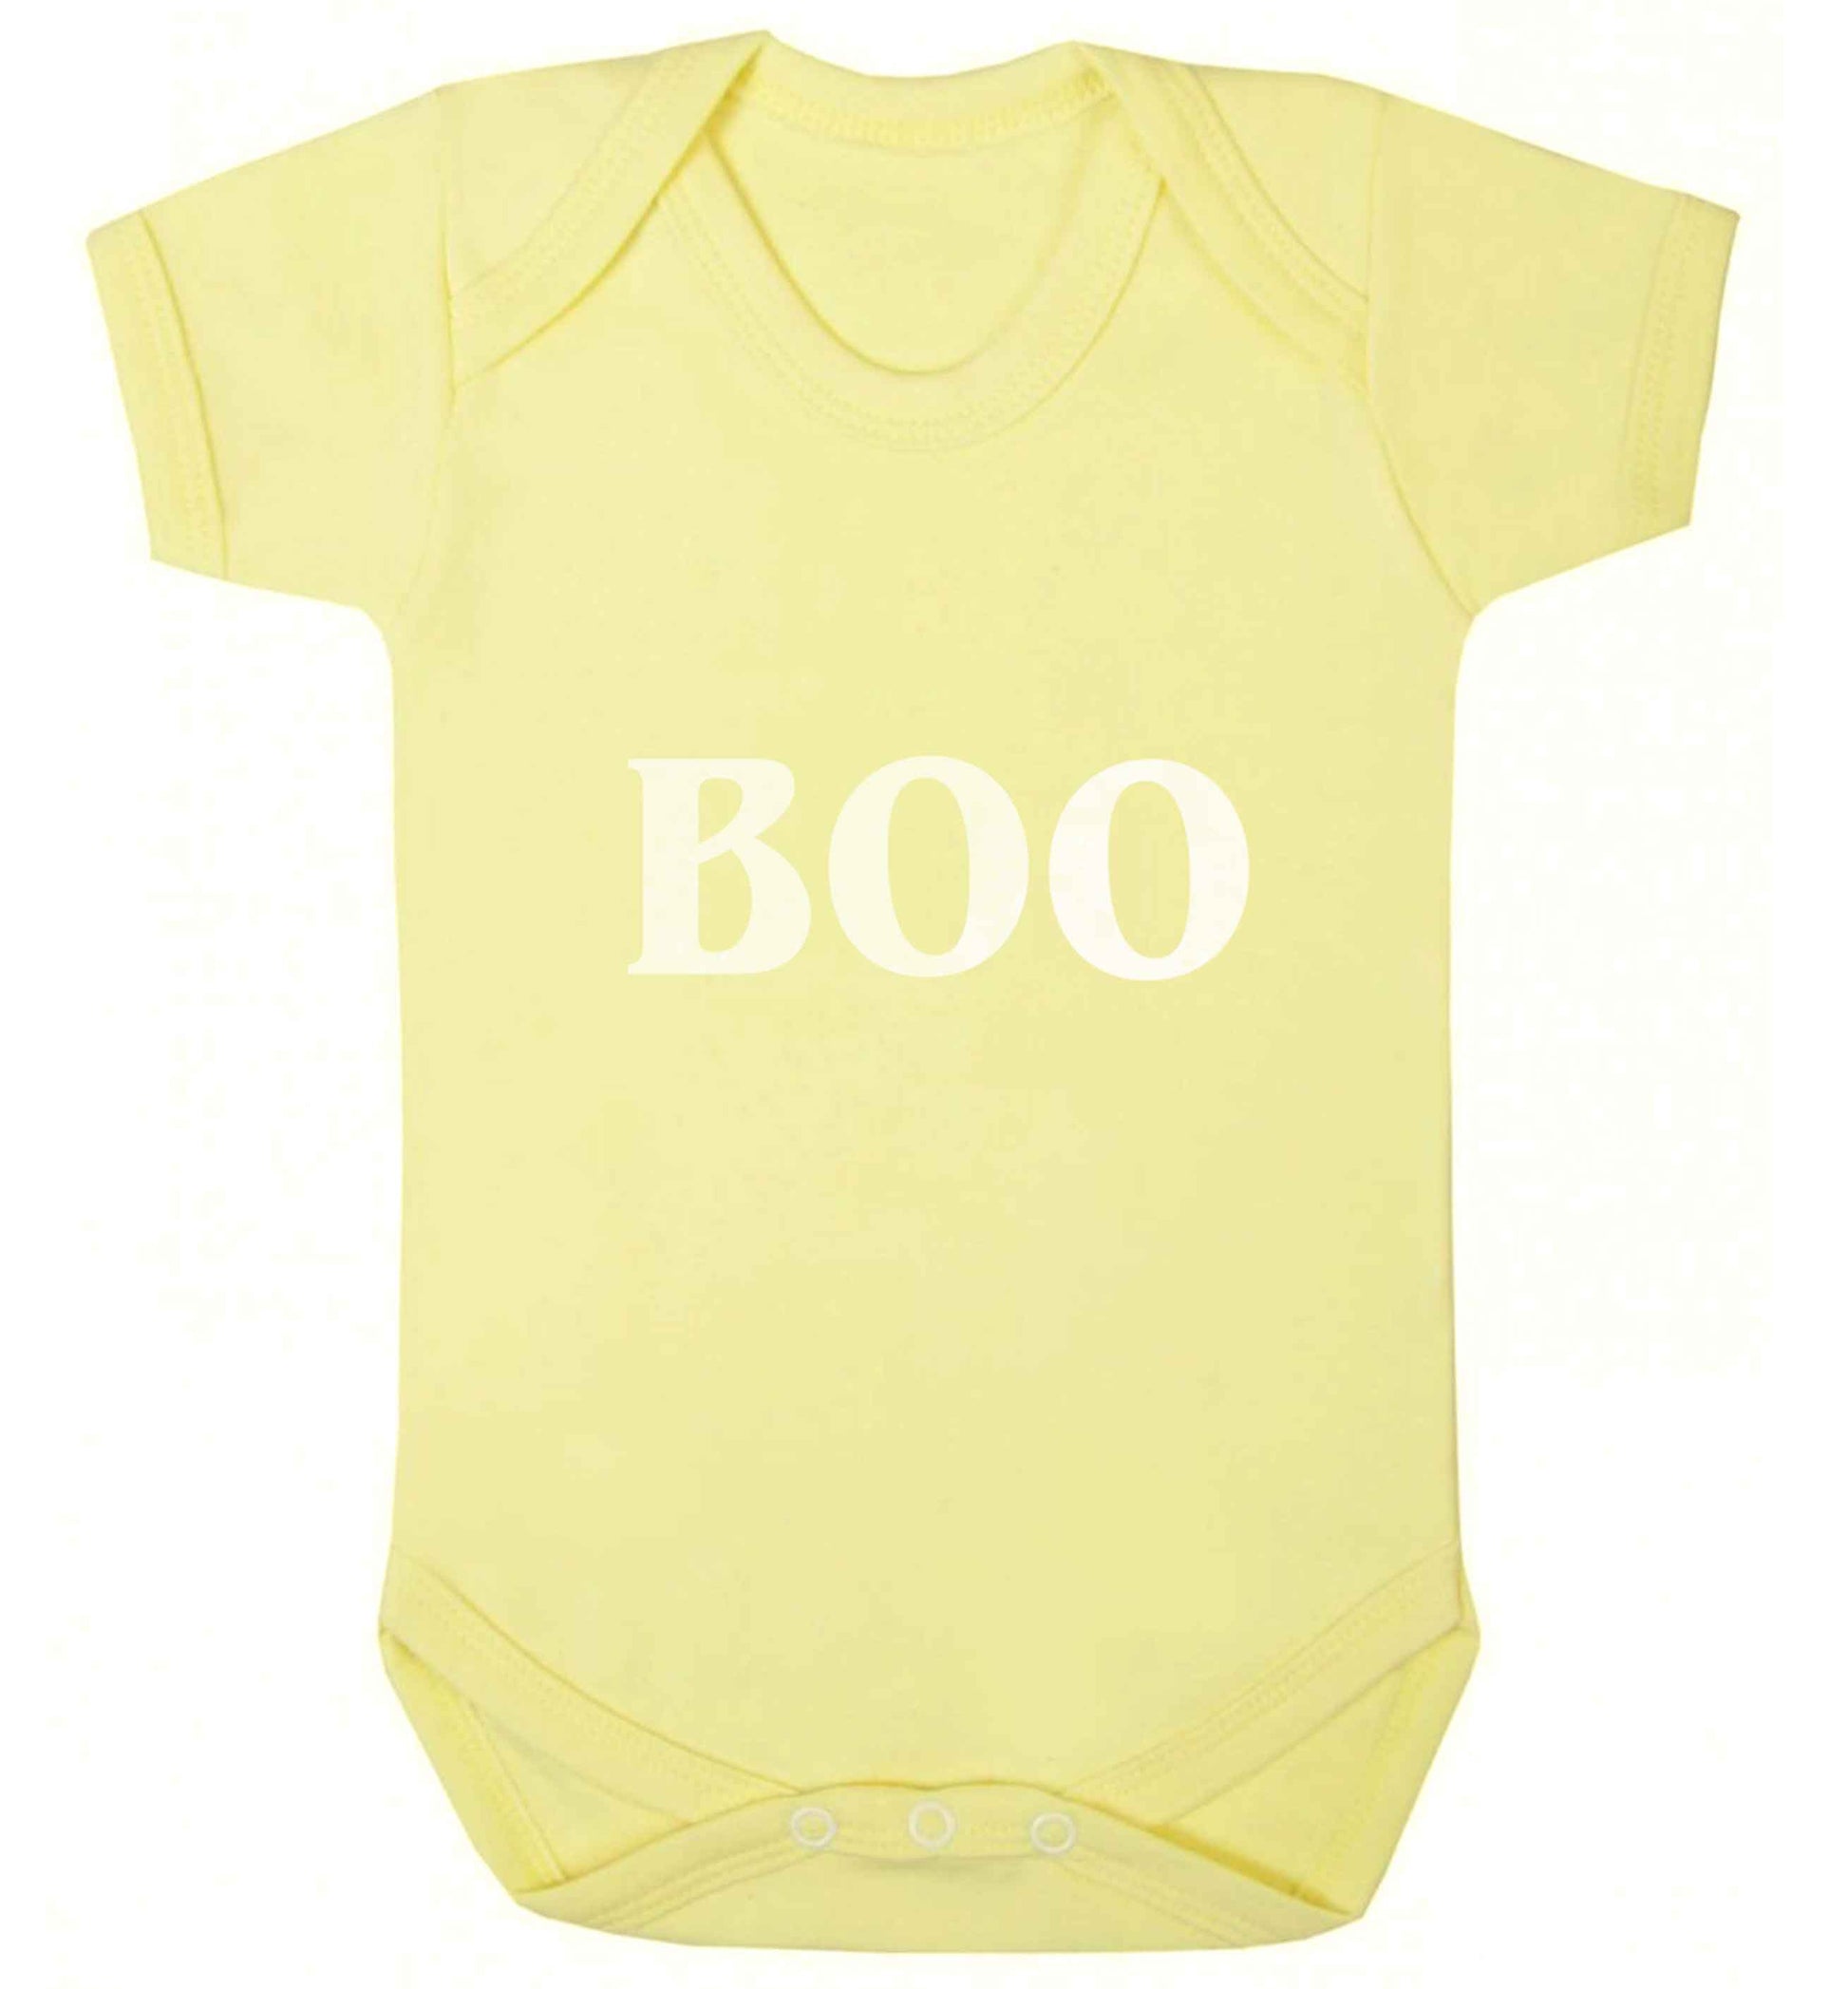 Boo baby vest pale yellow 18-24 months